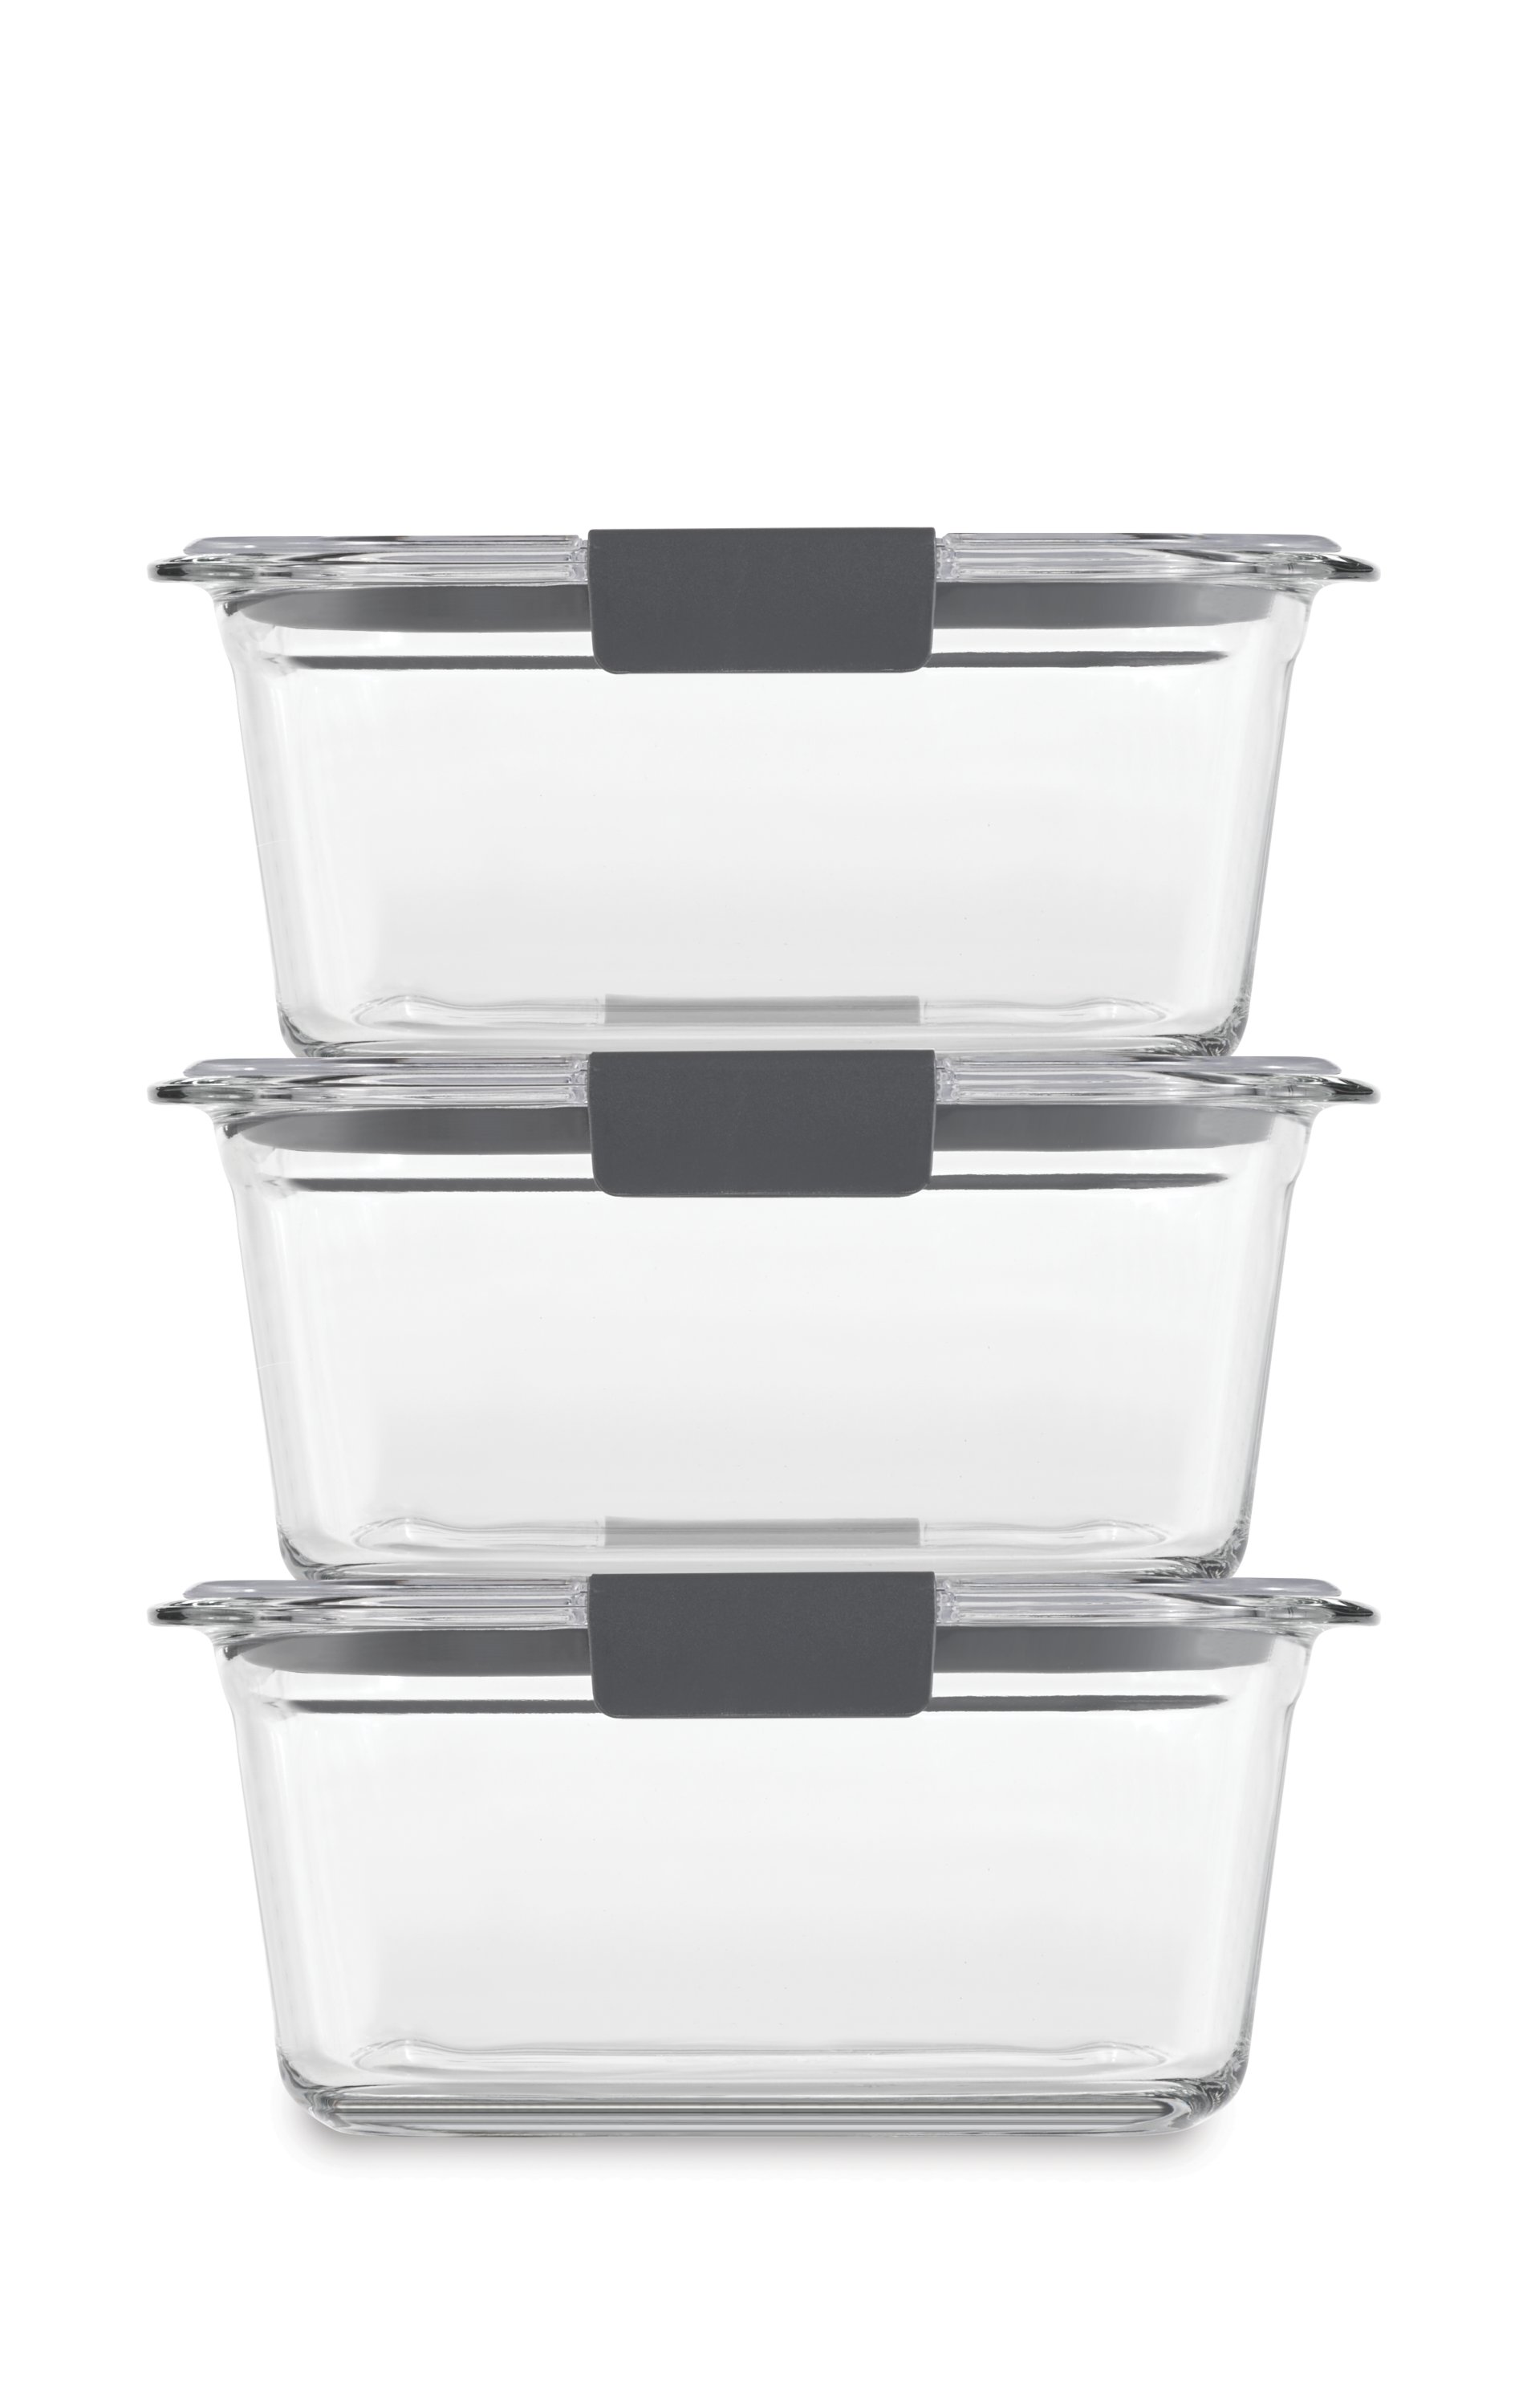 https://s7d9.scene7.com/is/image//NewellRubbermaid/2118305-rubbermaid-food-storage-brilliance-glass-clear-3pk-4.7c-straight-on